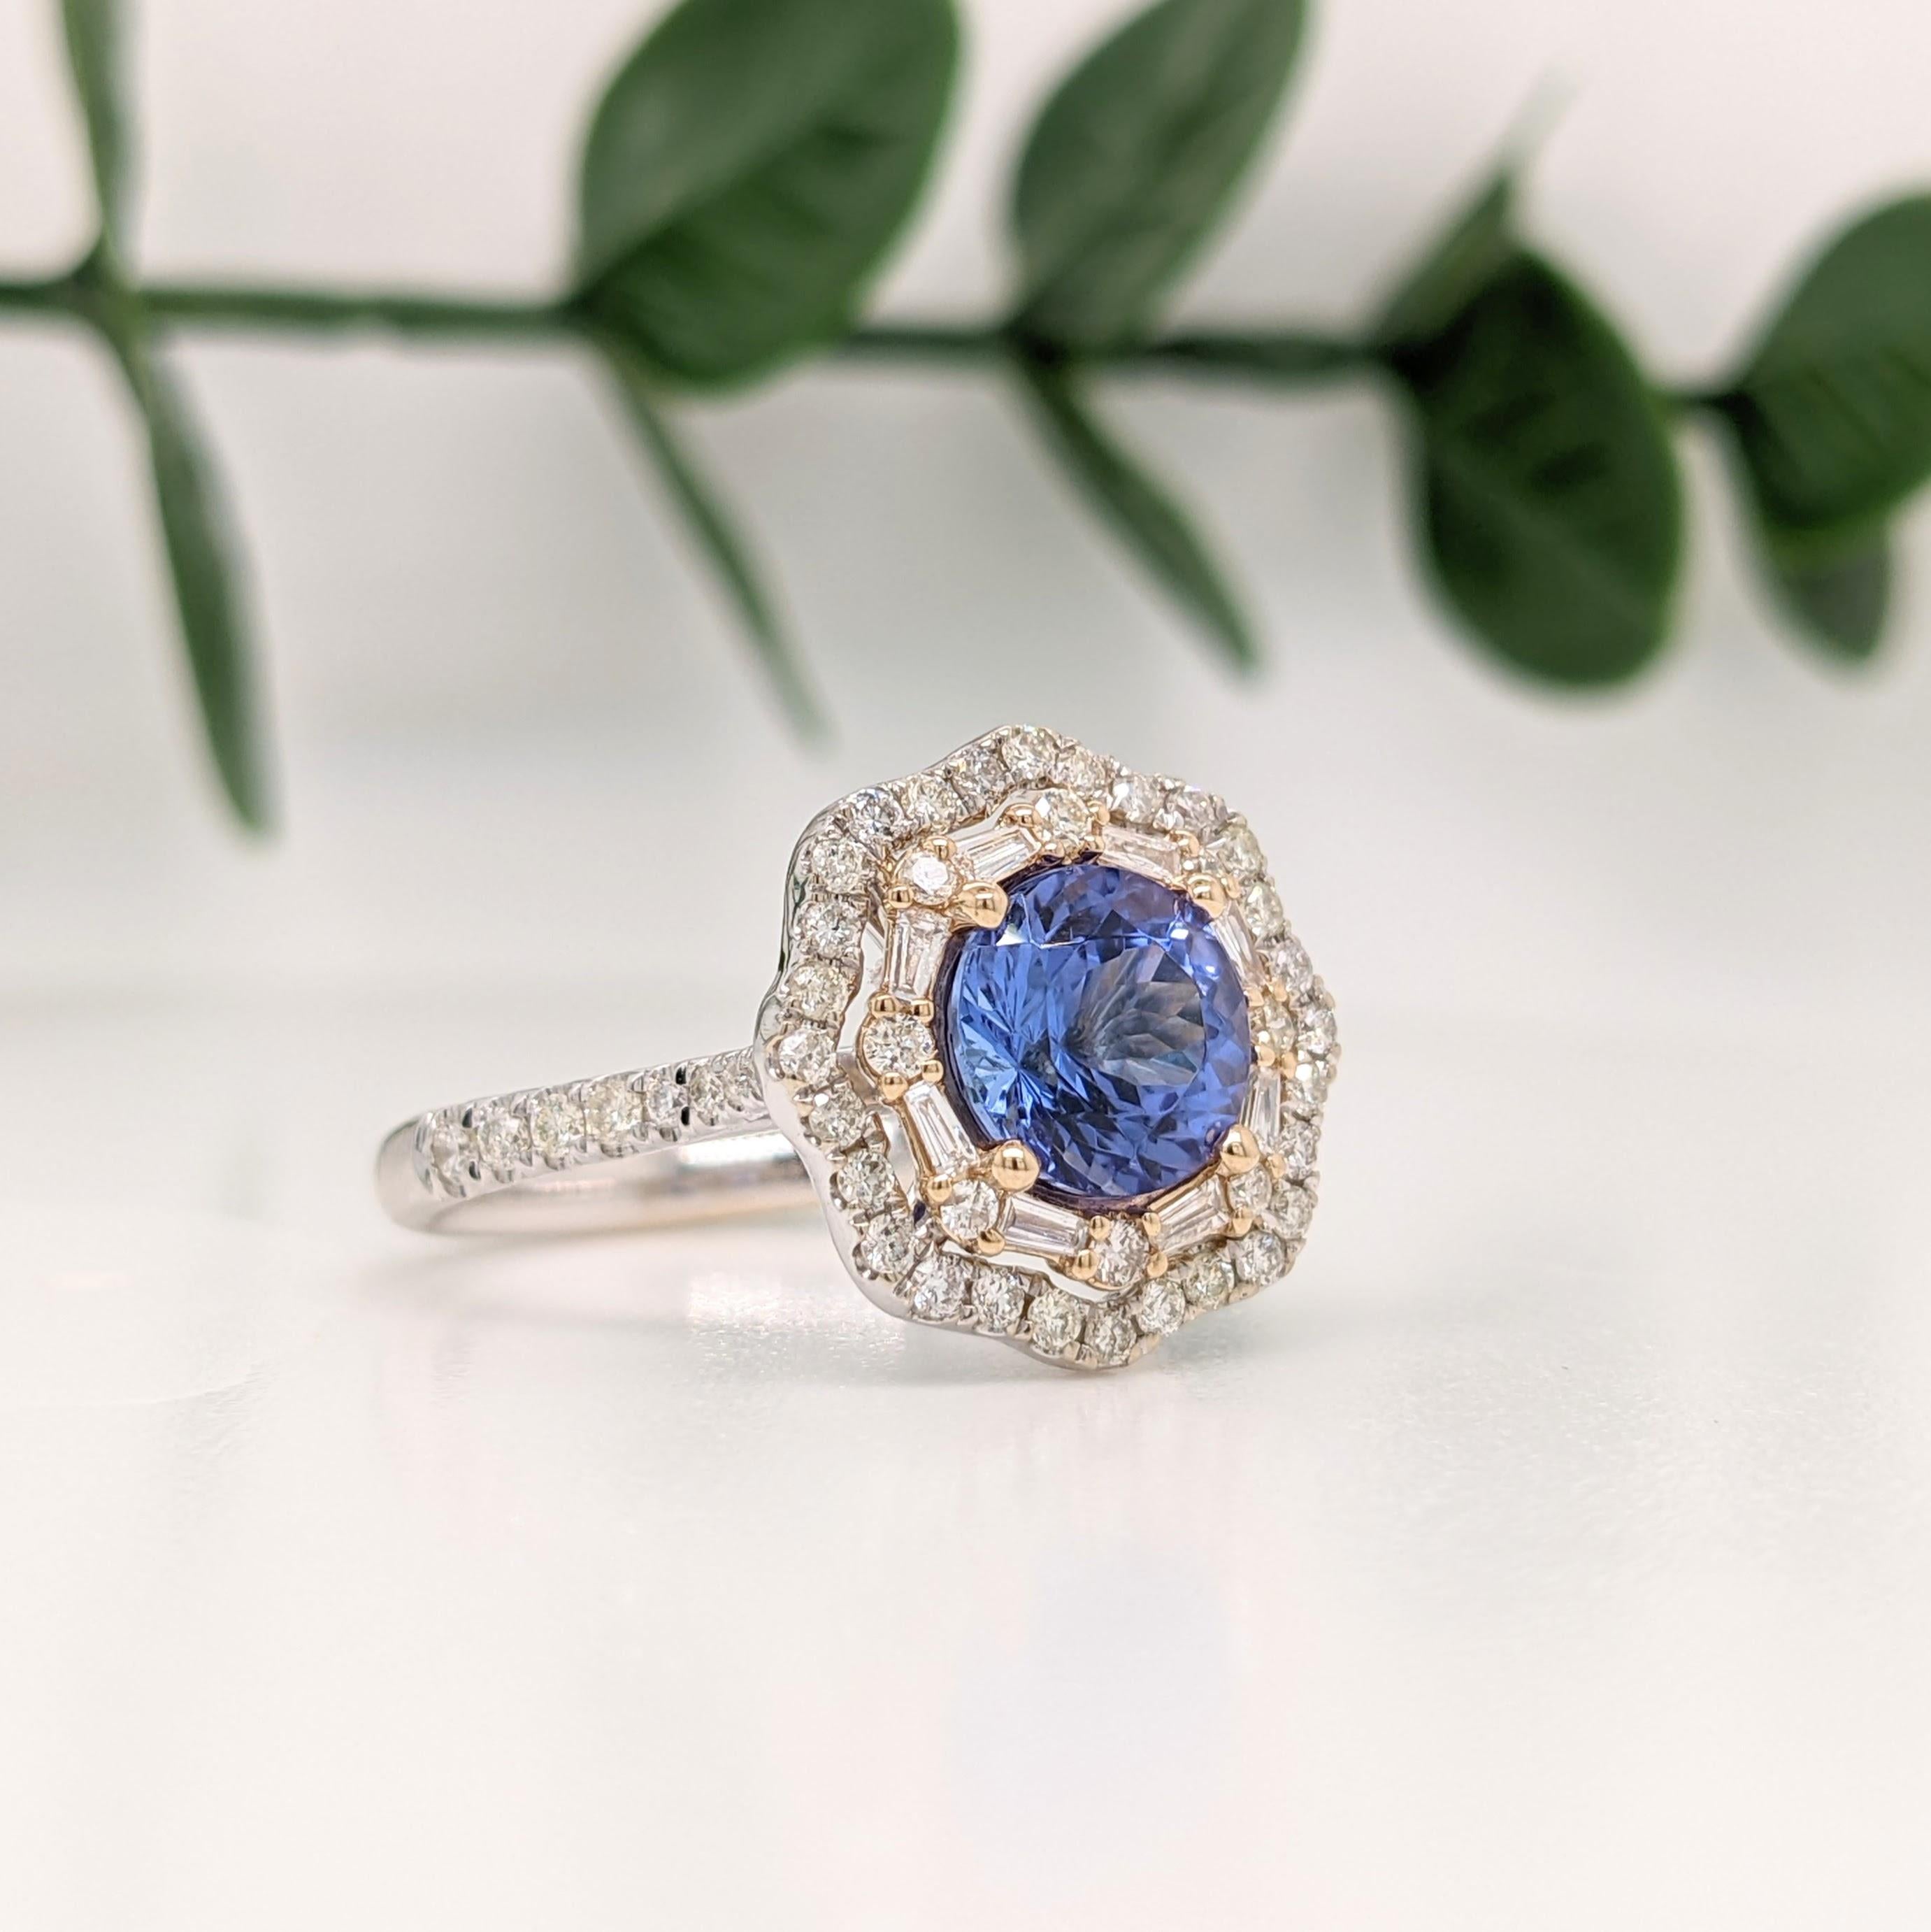 This stunning ring features a stunning vibrant Blue Tanzanite in 14K dual tone Gold with round and baguette diamond accents. This cocktail ring makes for a stunning accessory to any look!

A fancy ring design perfect for an eye catching engagement